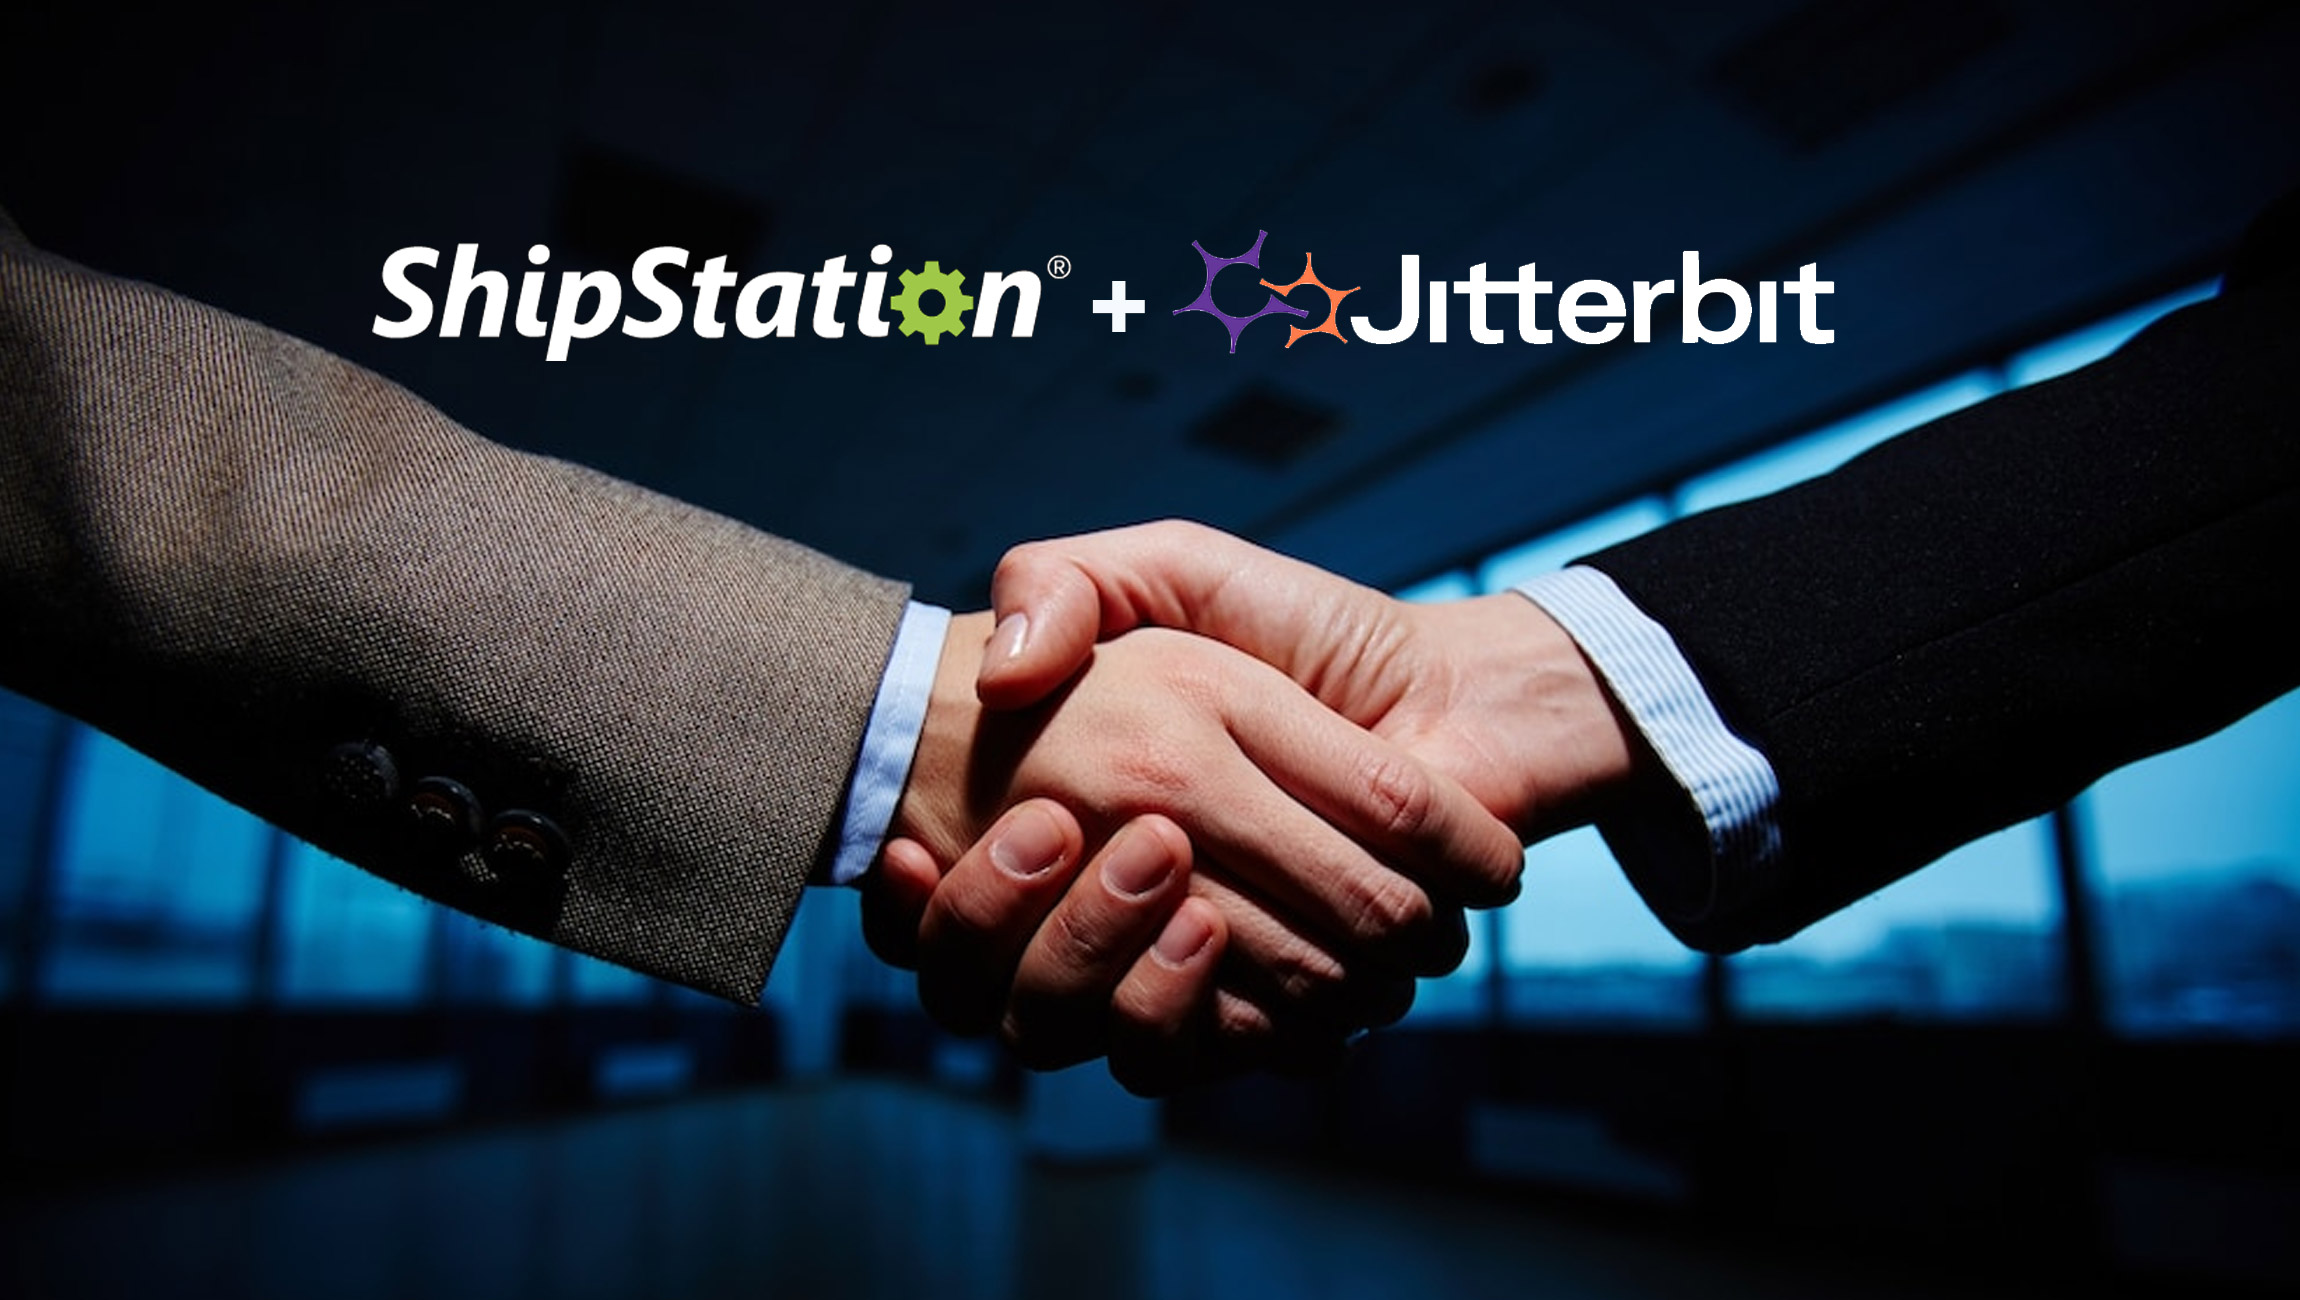 ShipStation Partners With Jitterbit to Embed Intelligent Automation With ERPs, Driving Efficiency for Merchants